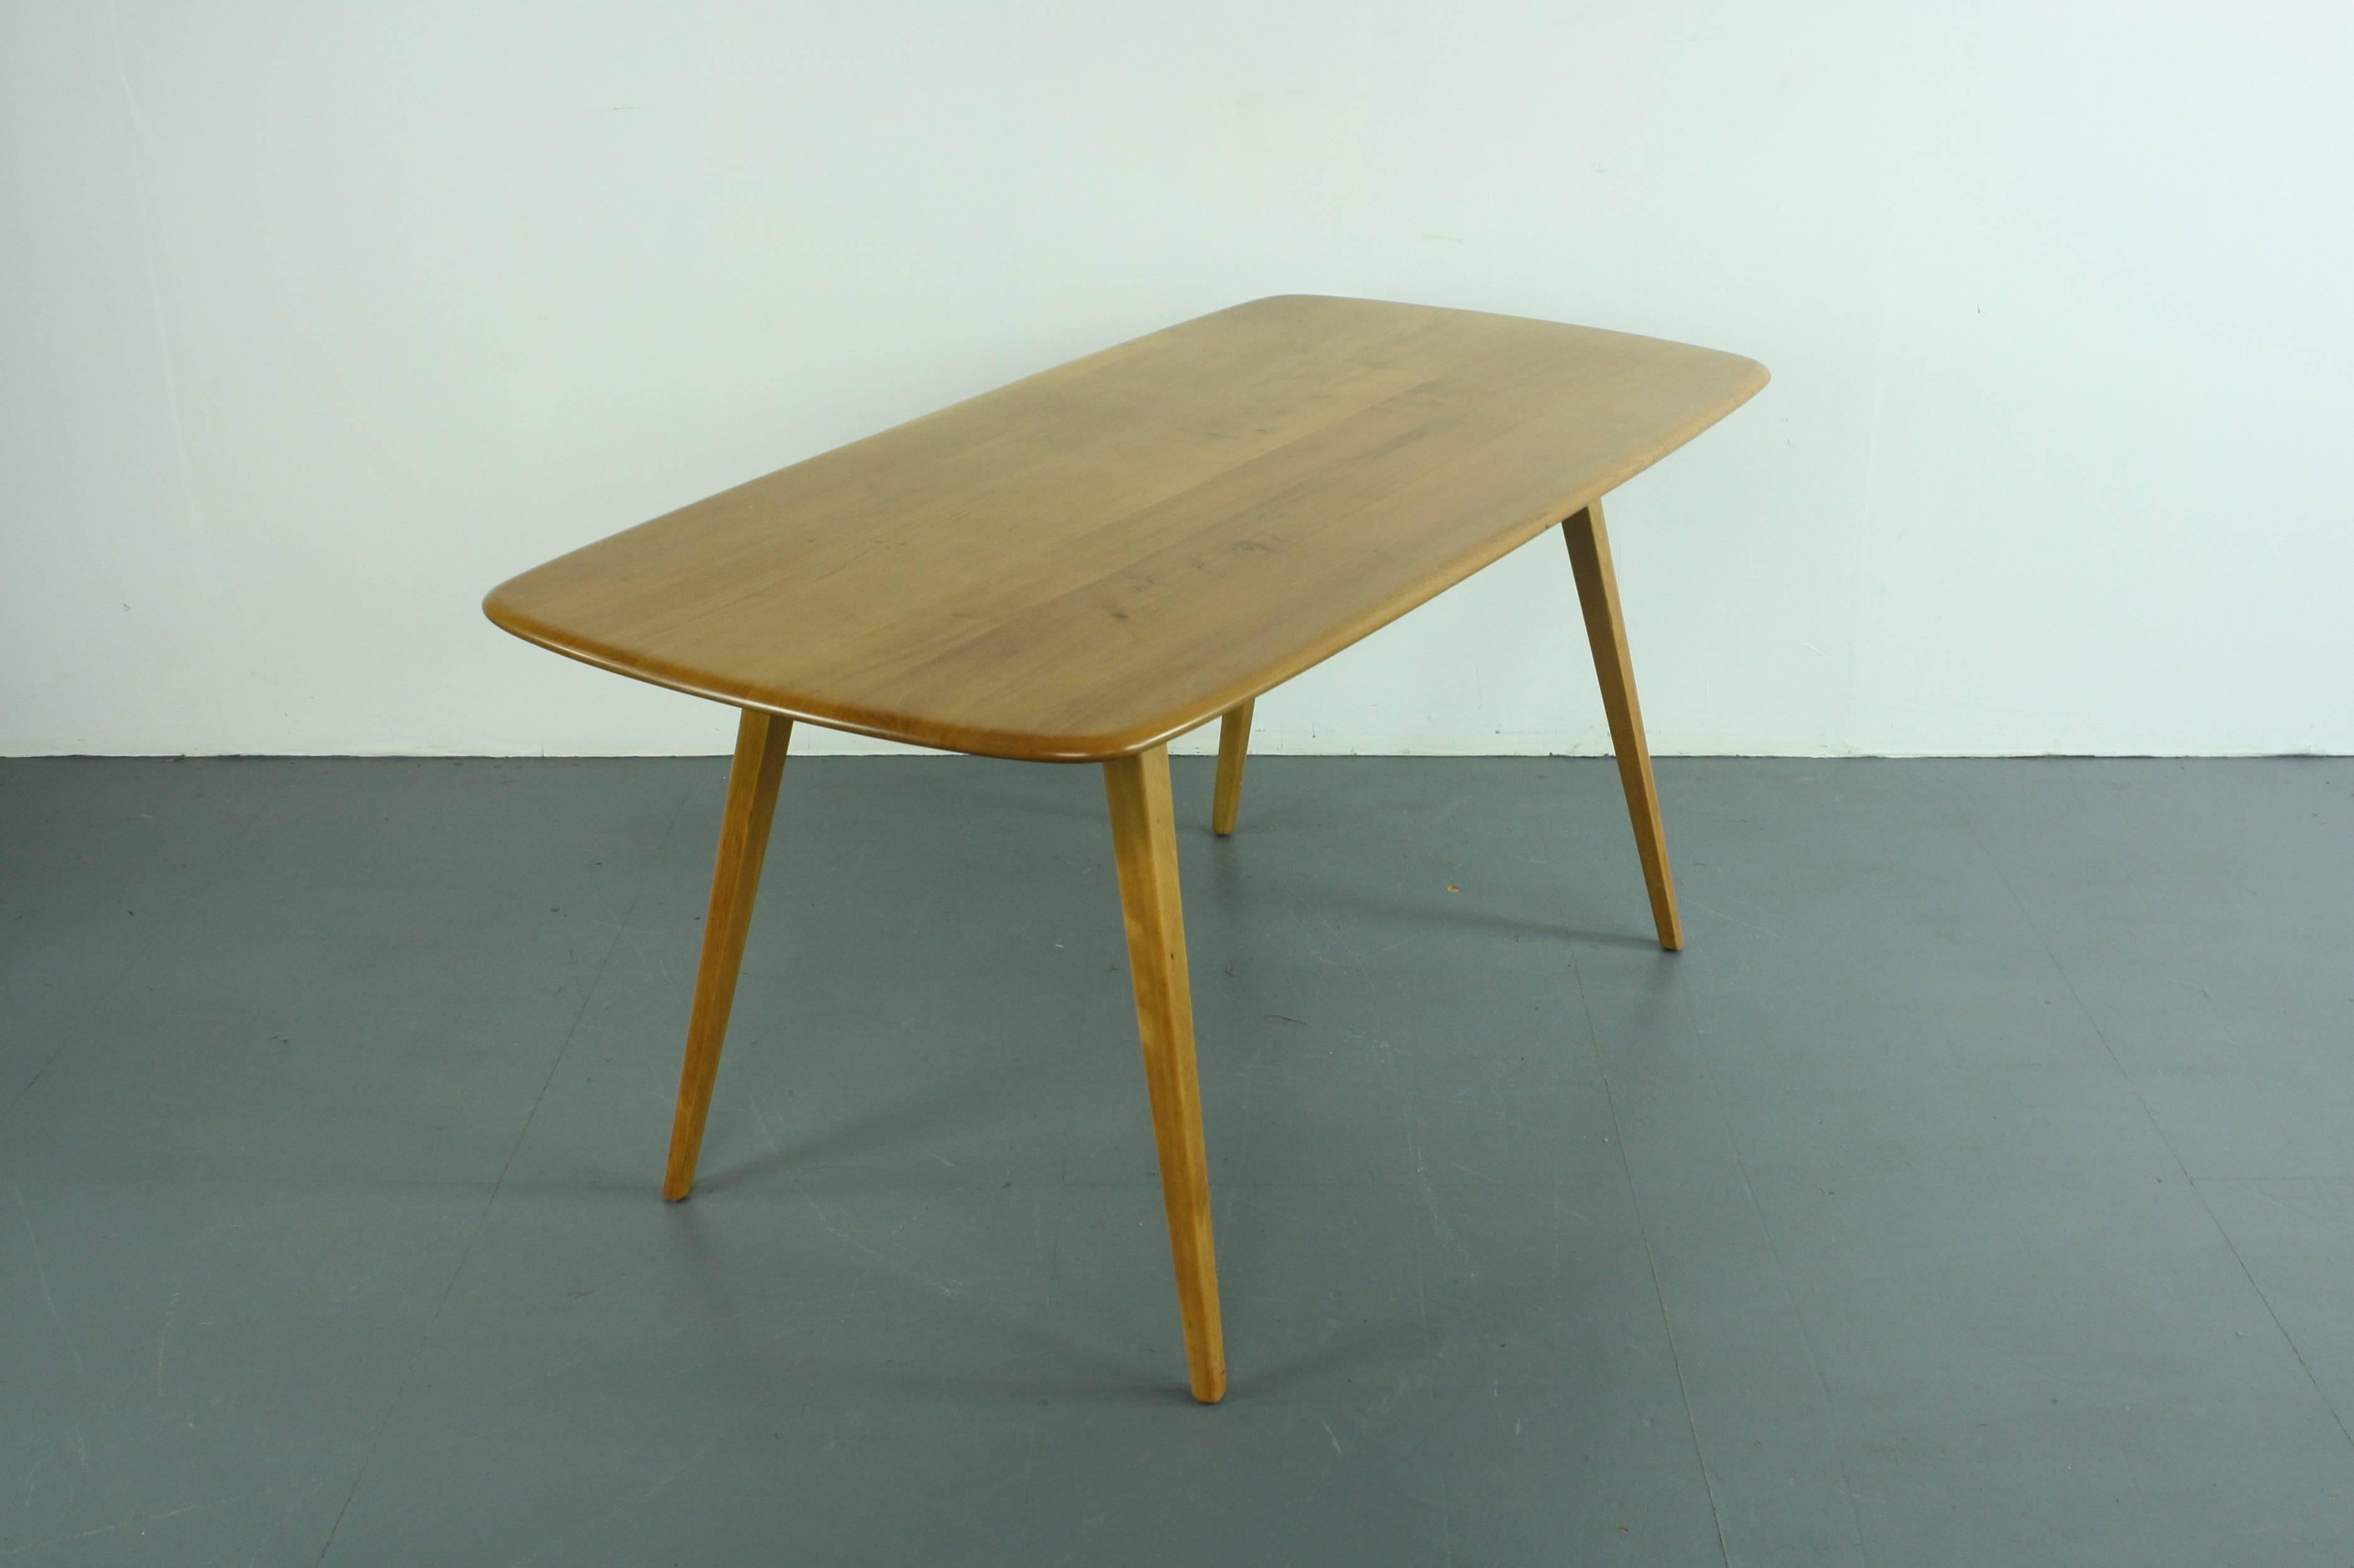 English Vintage Midcentury British Ercol Plank Dining Table For Sale